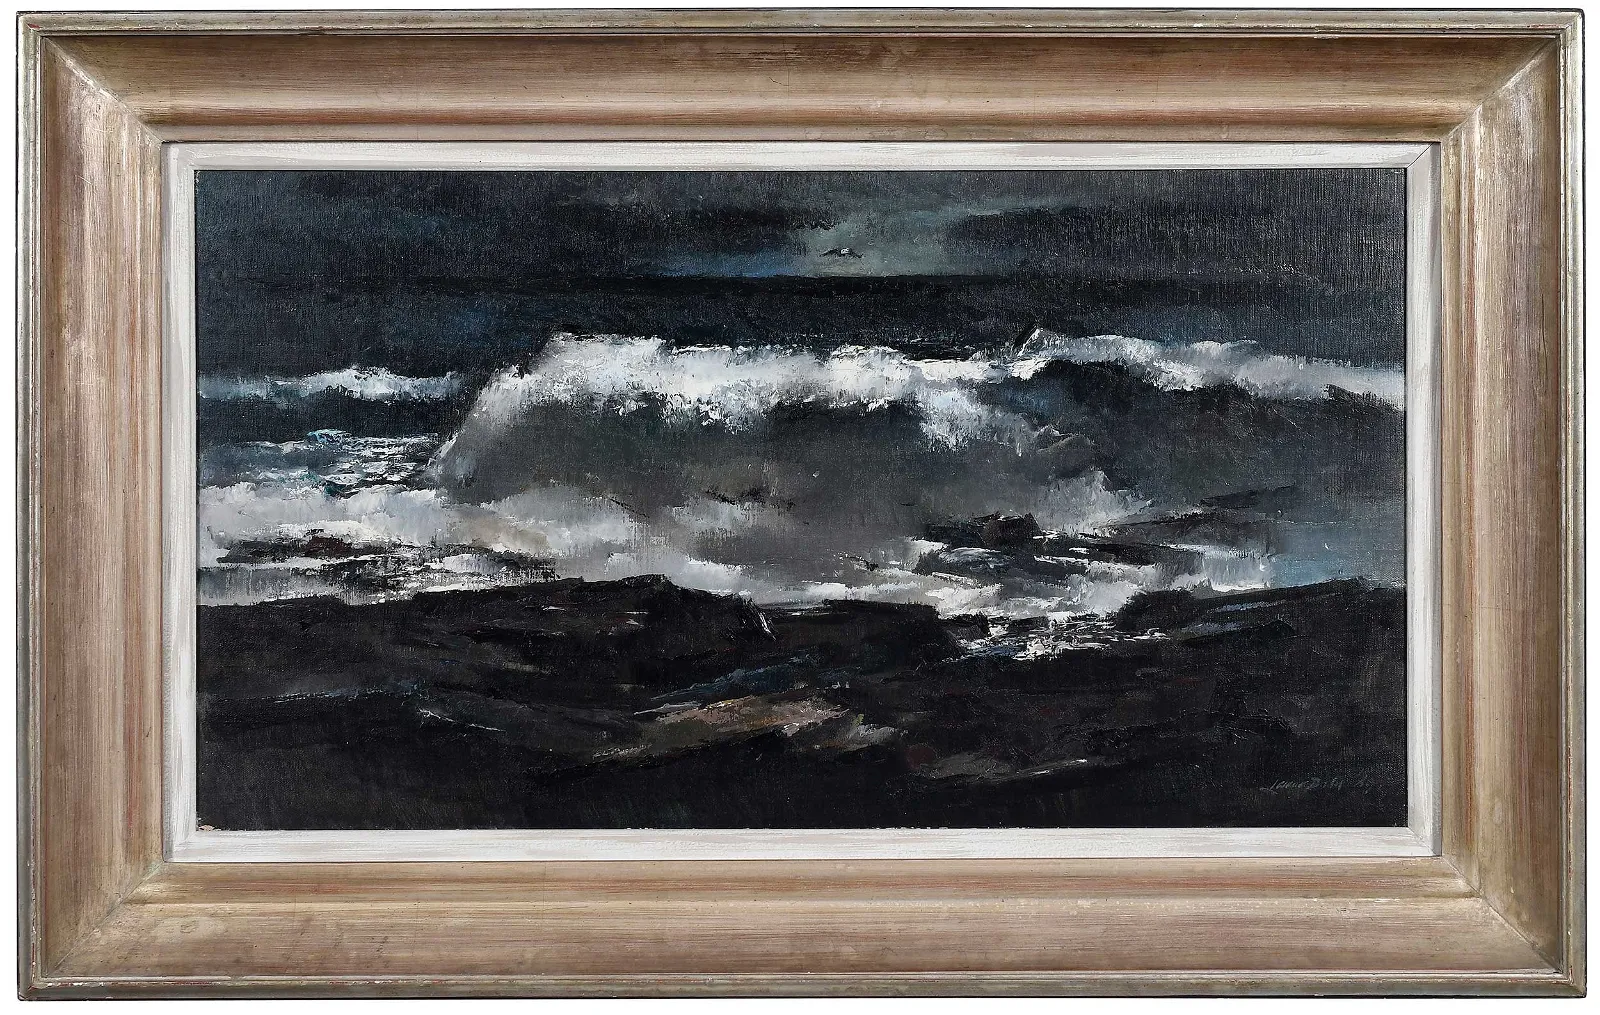 Lamar Dodd, The Wave, 1949. Image courtesy of Brunk Auctions. 
